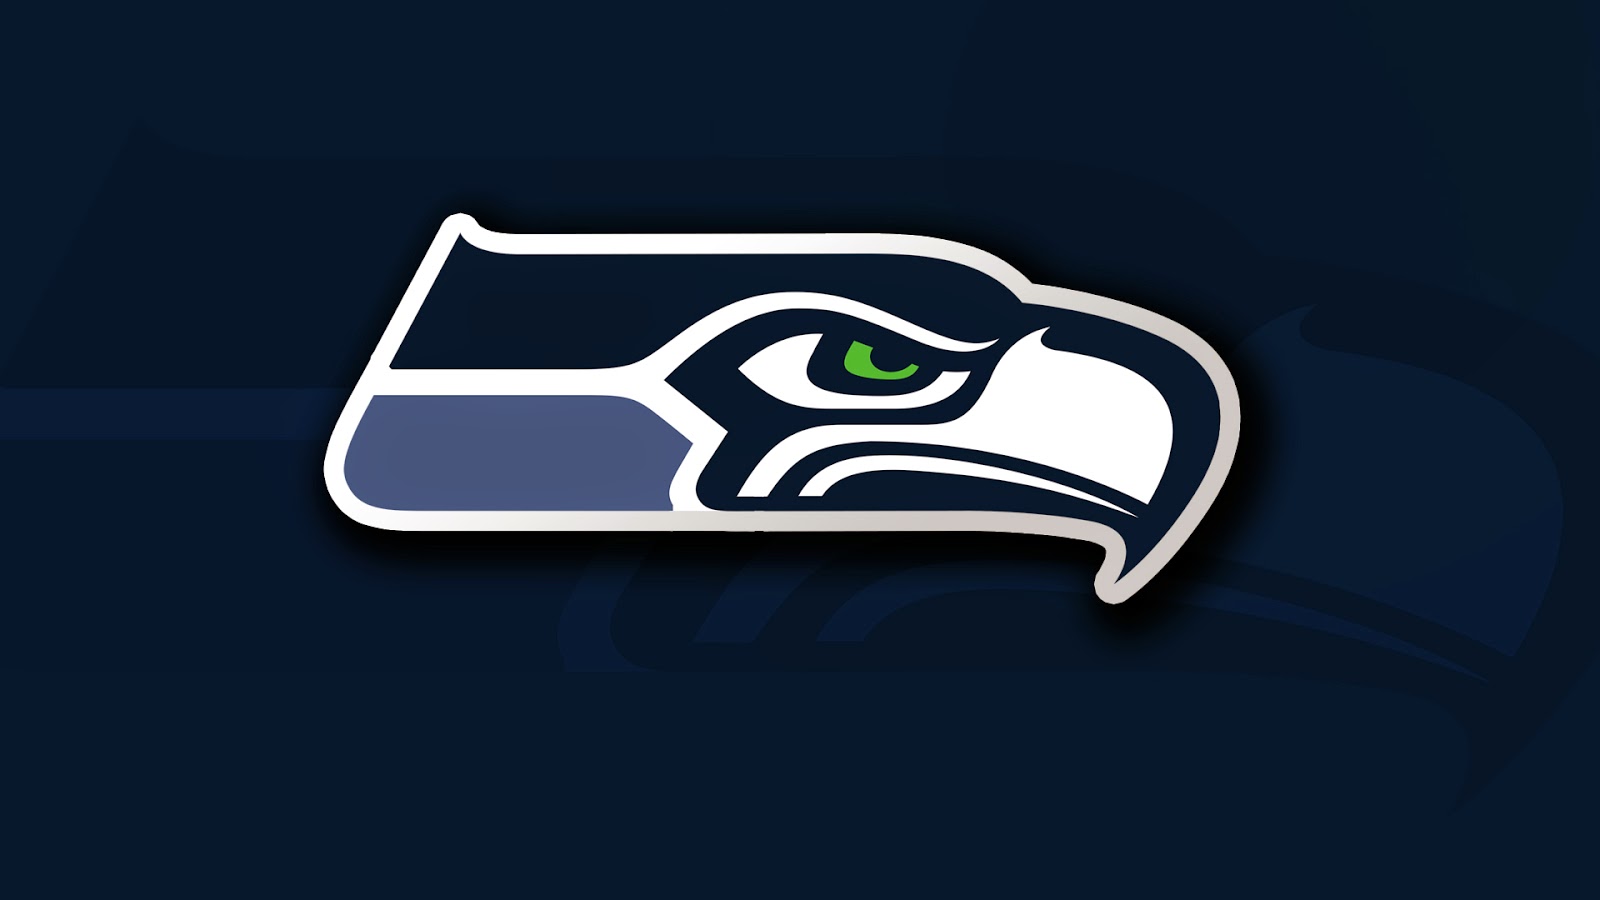 Seahawks Vs Broncos Logo Images Pictures Becuo